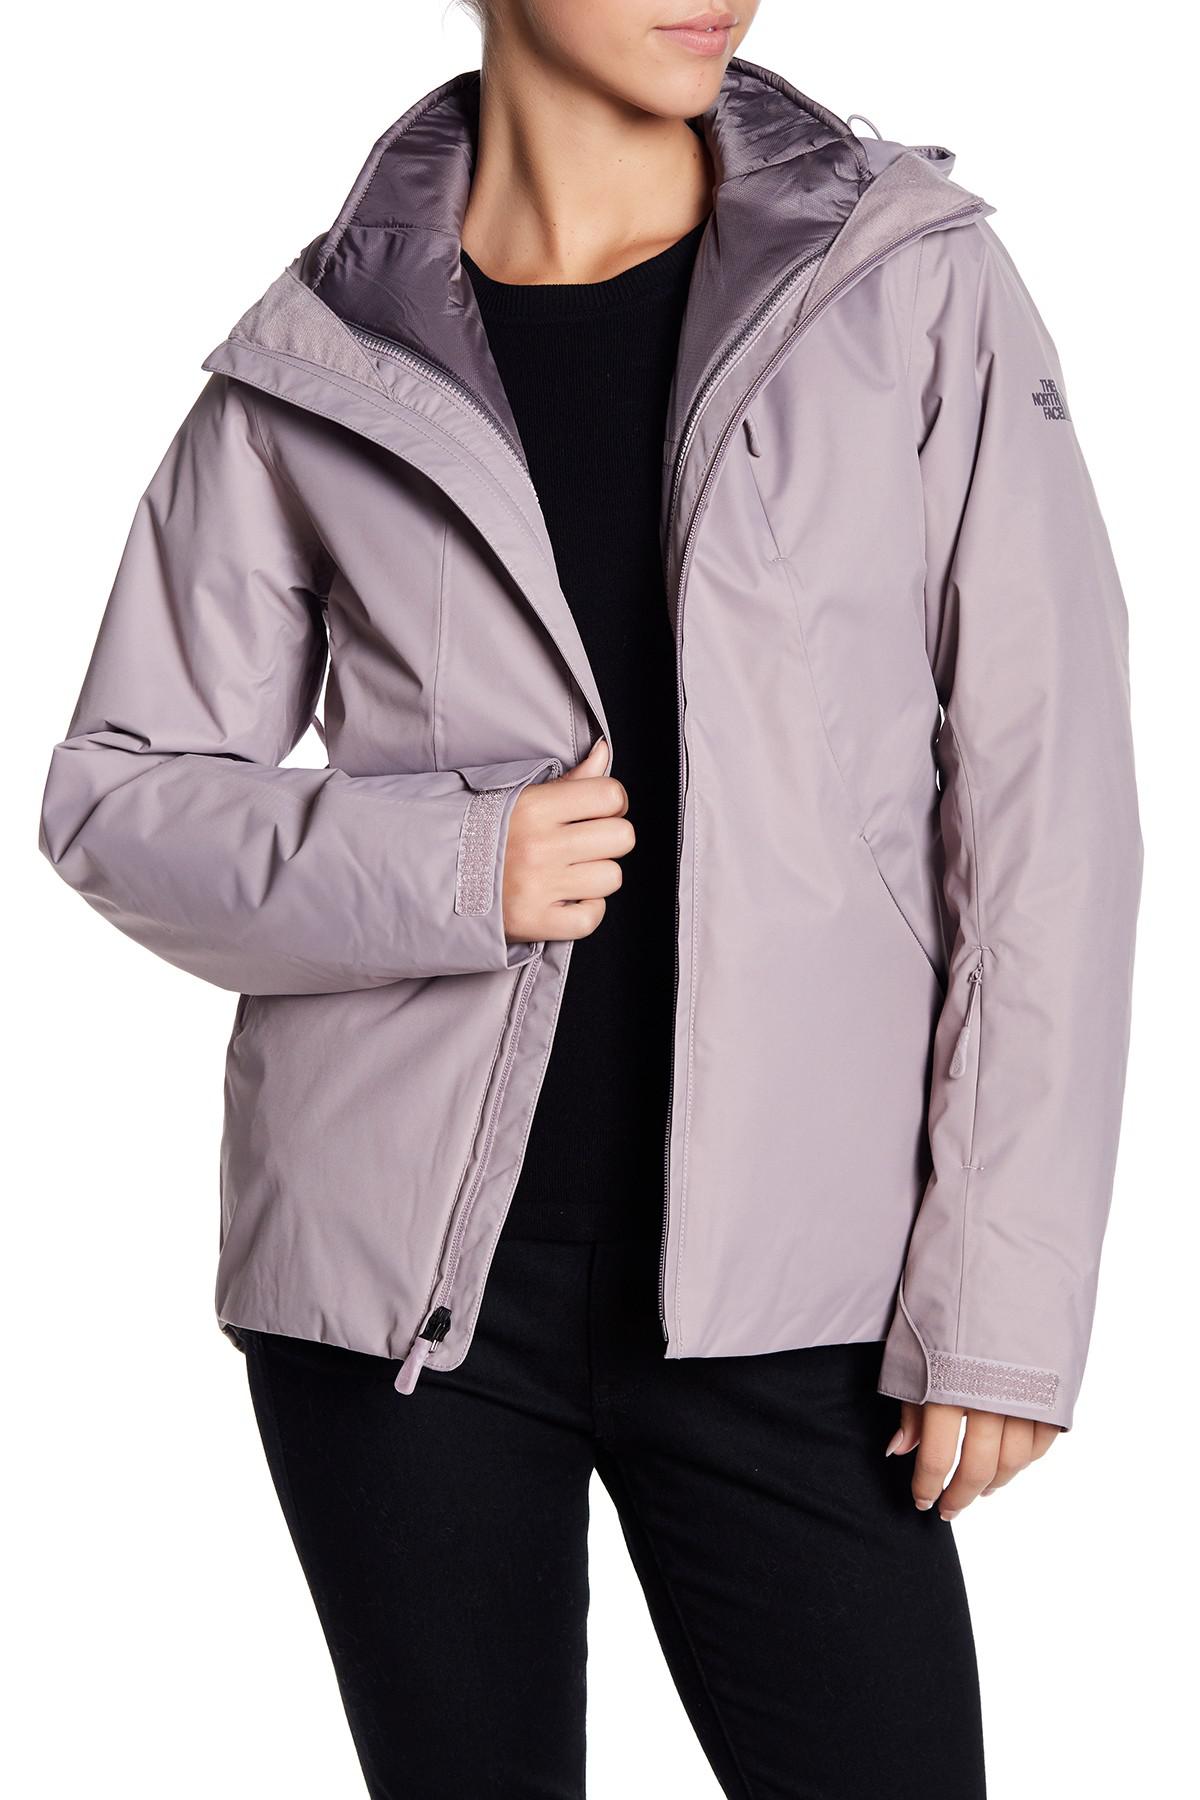 north face clementine triclimate